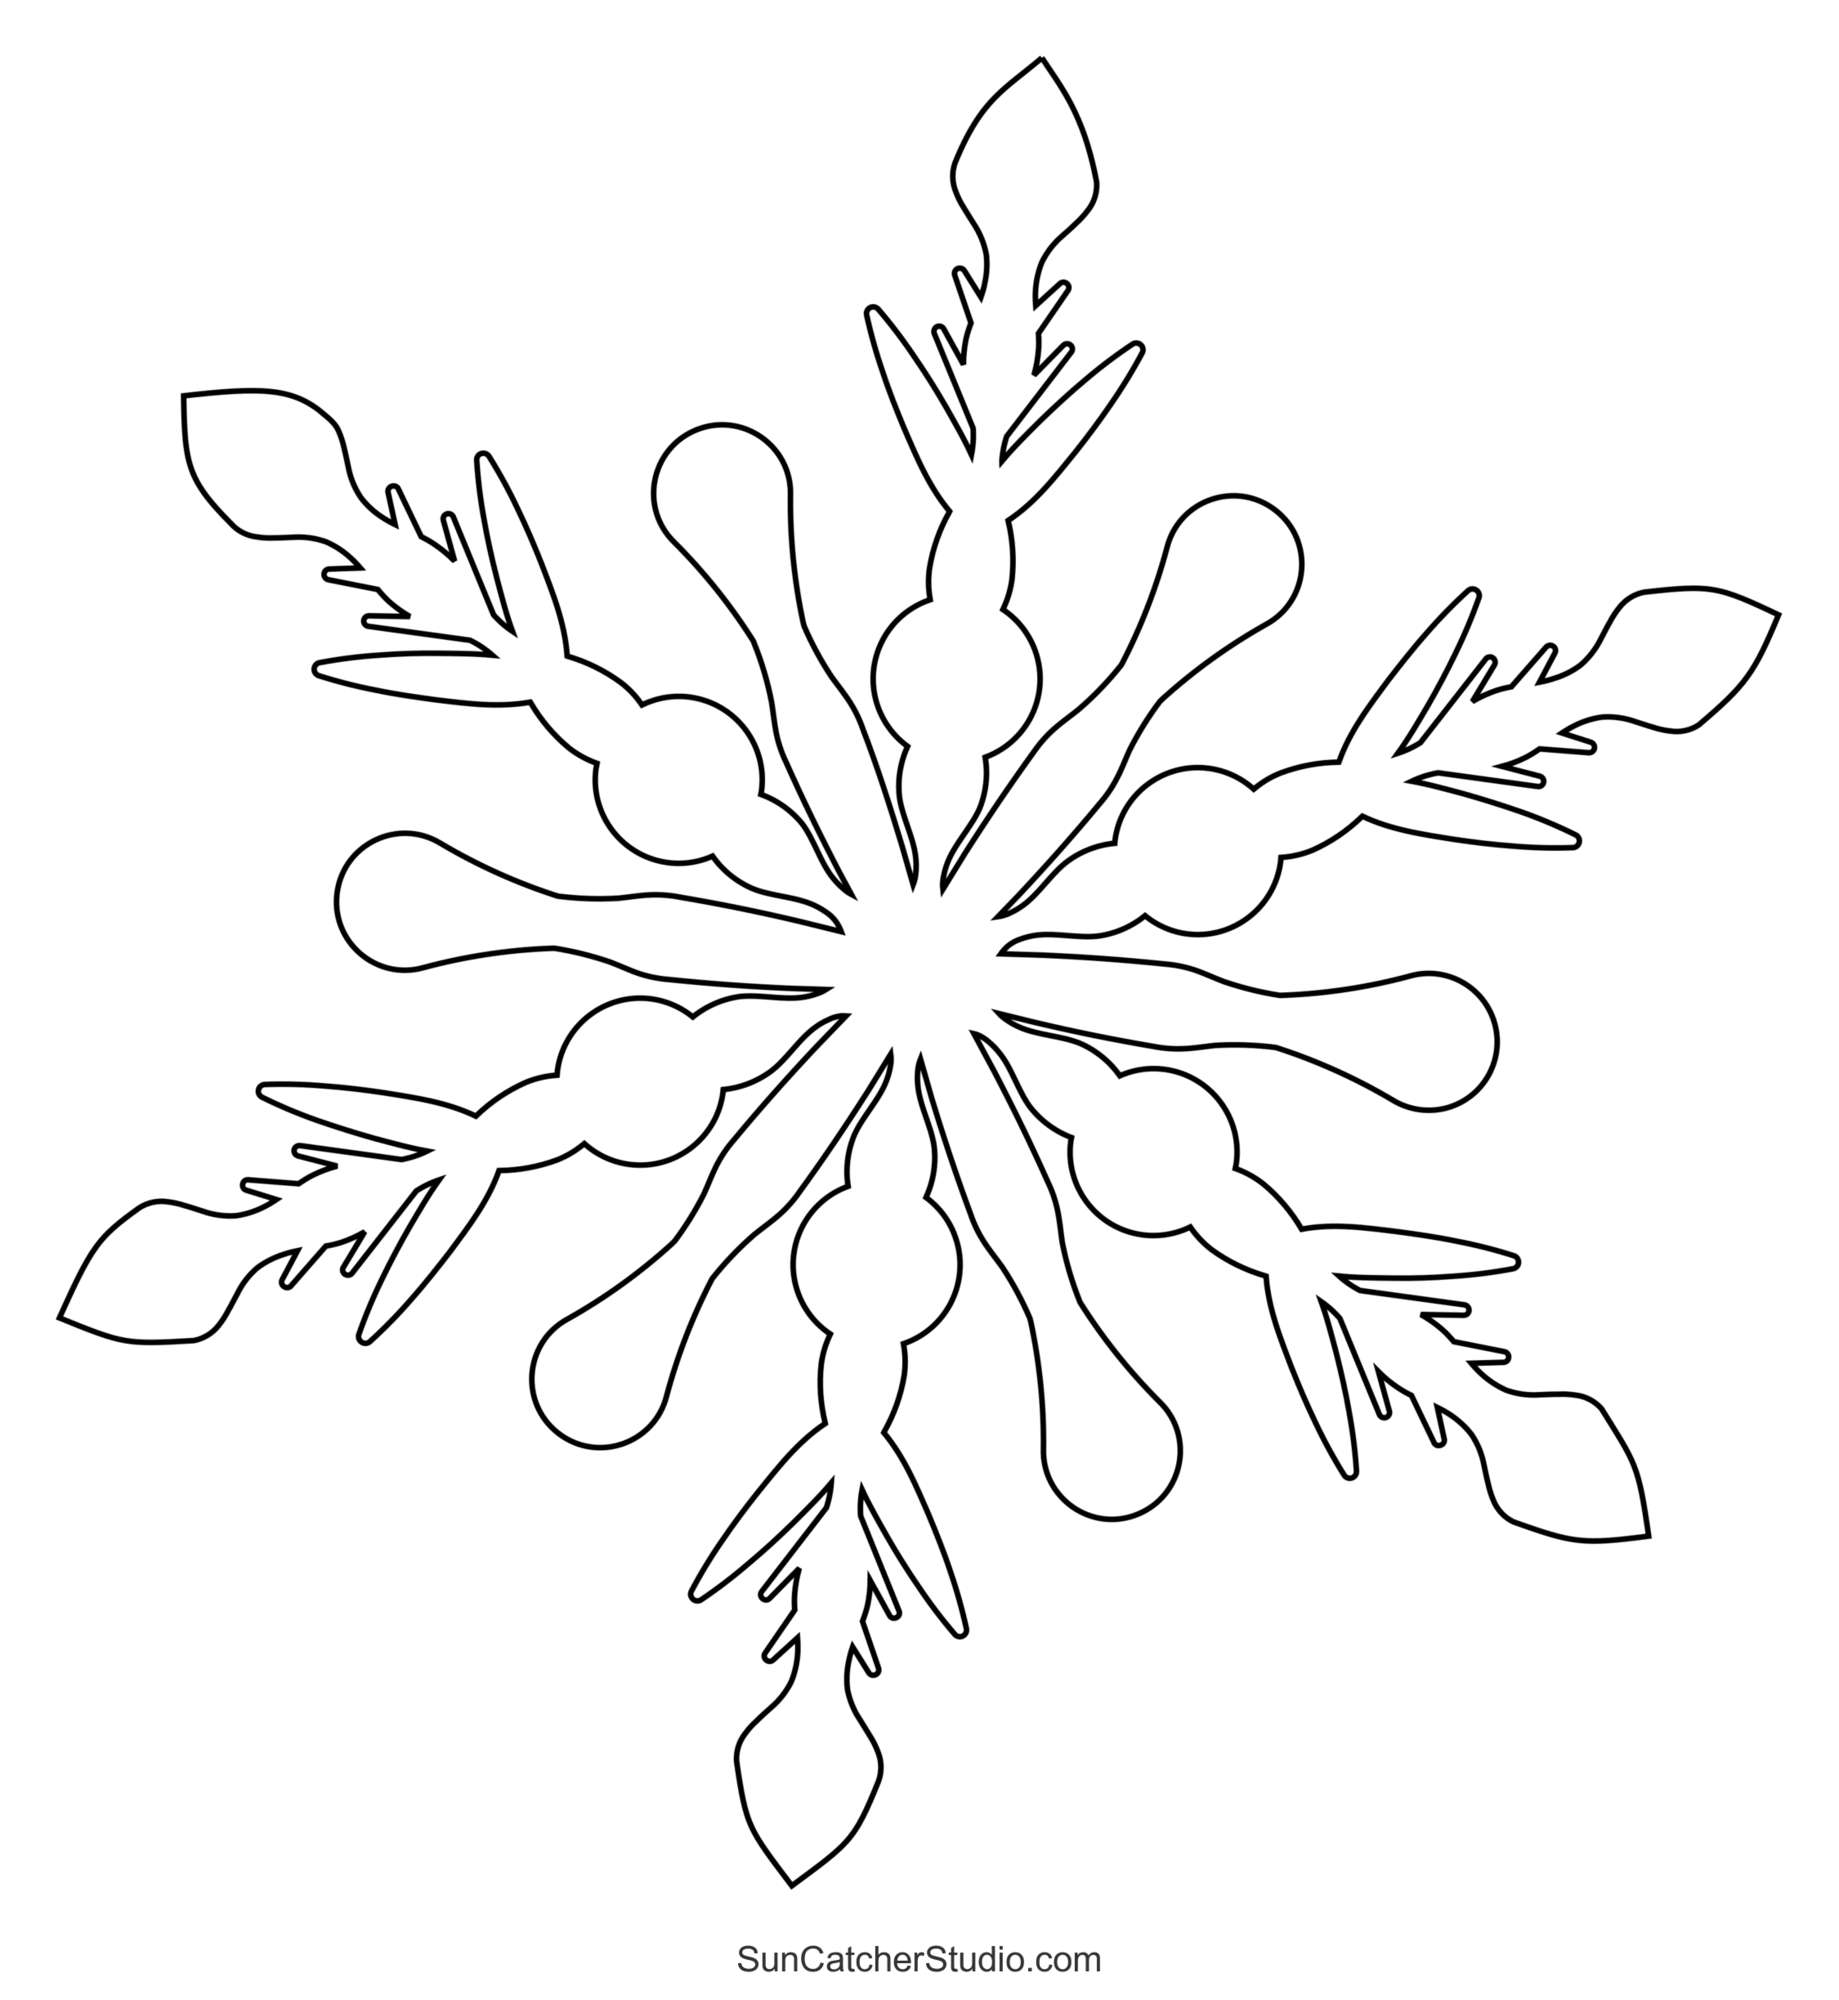 FREE Snowflake Vector Templates & Examples - Edit Online & Download